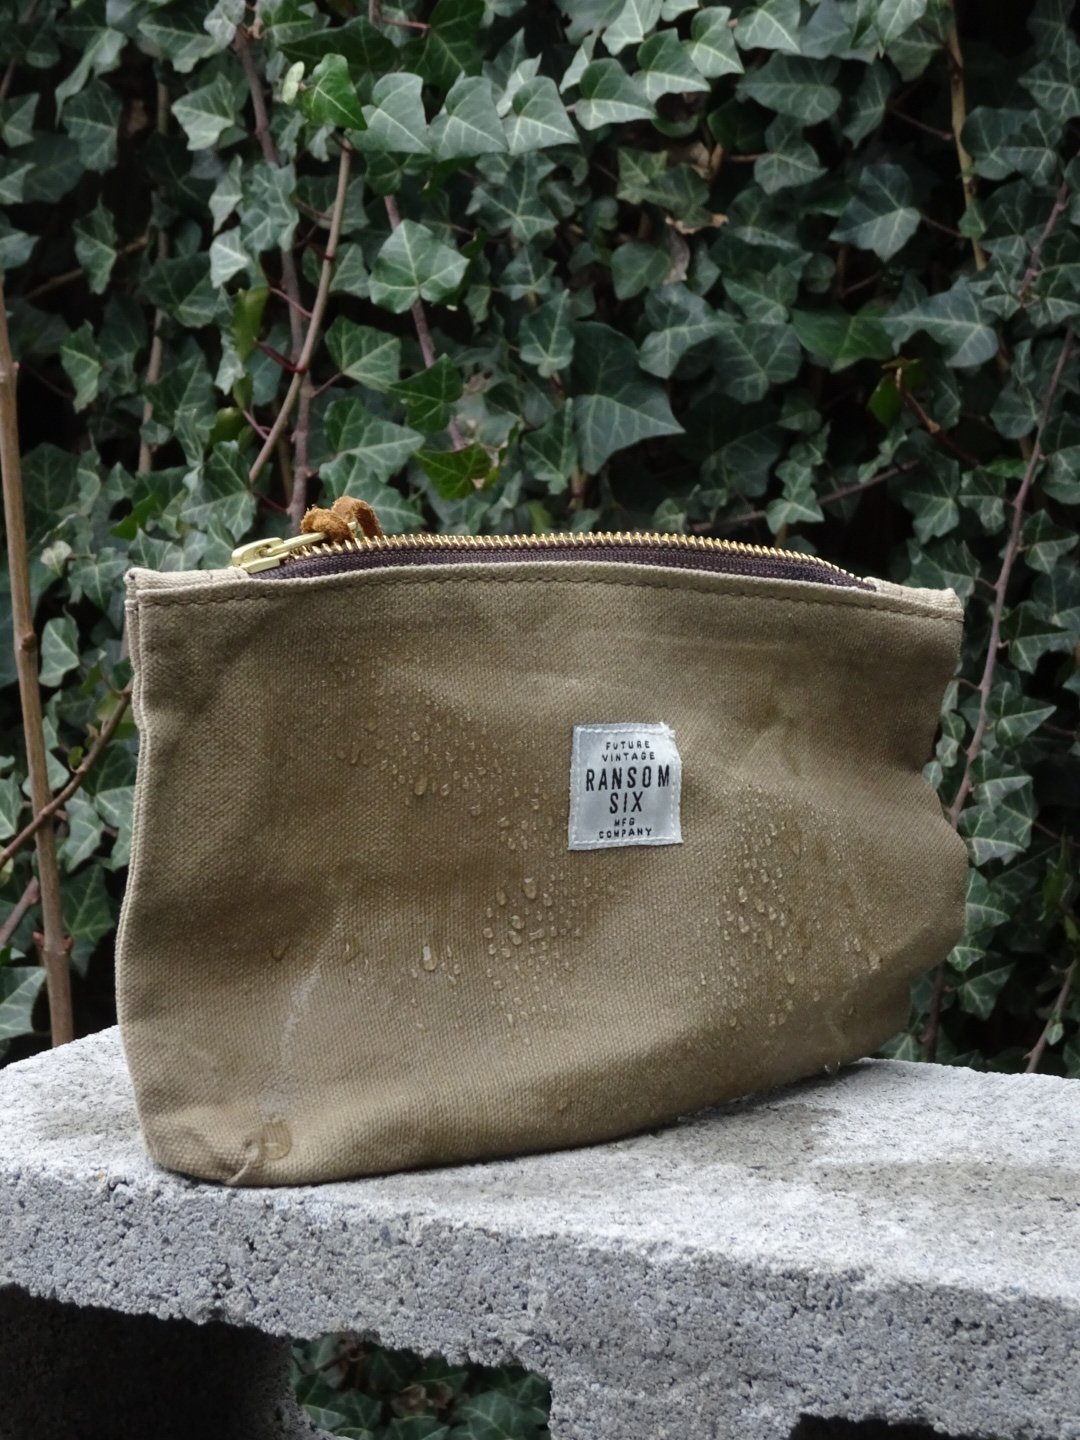 Image of Waxed Canvas Zipper Pouch - Olive 